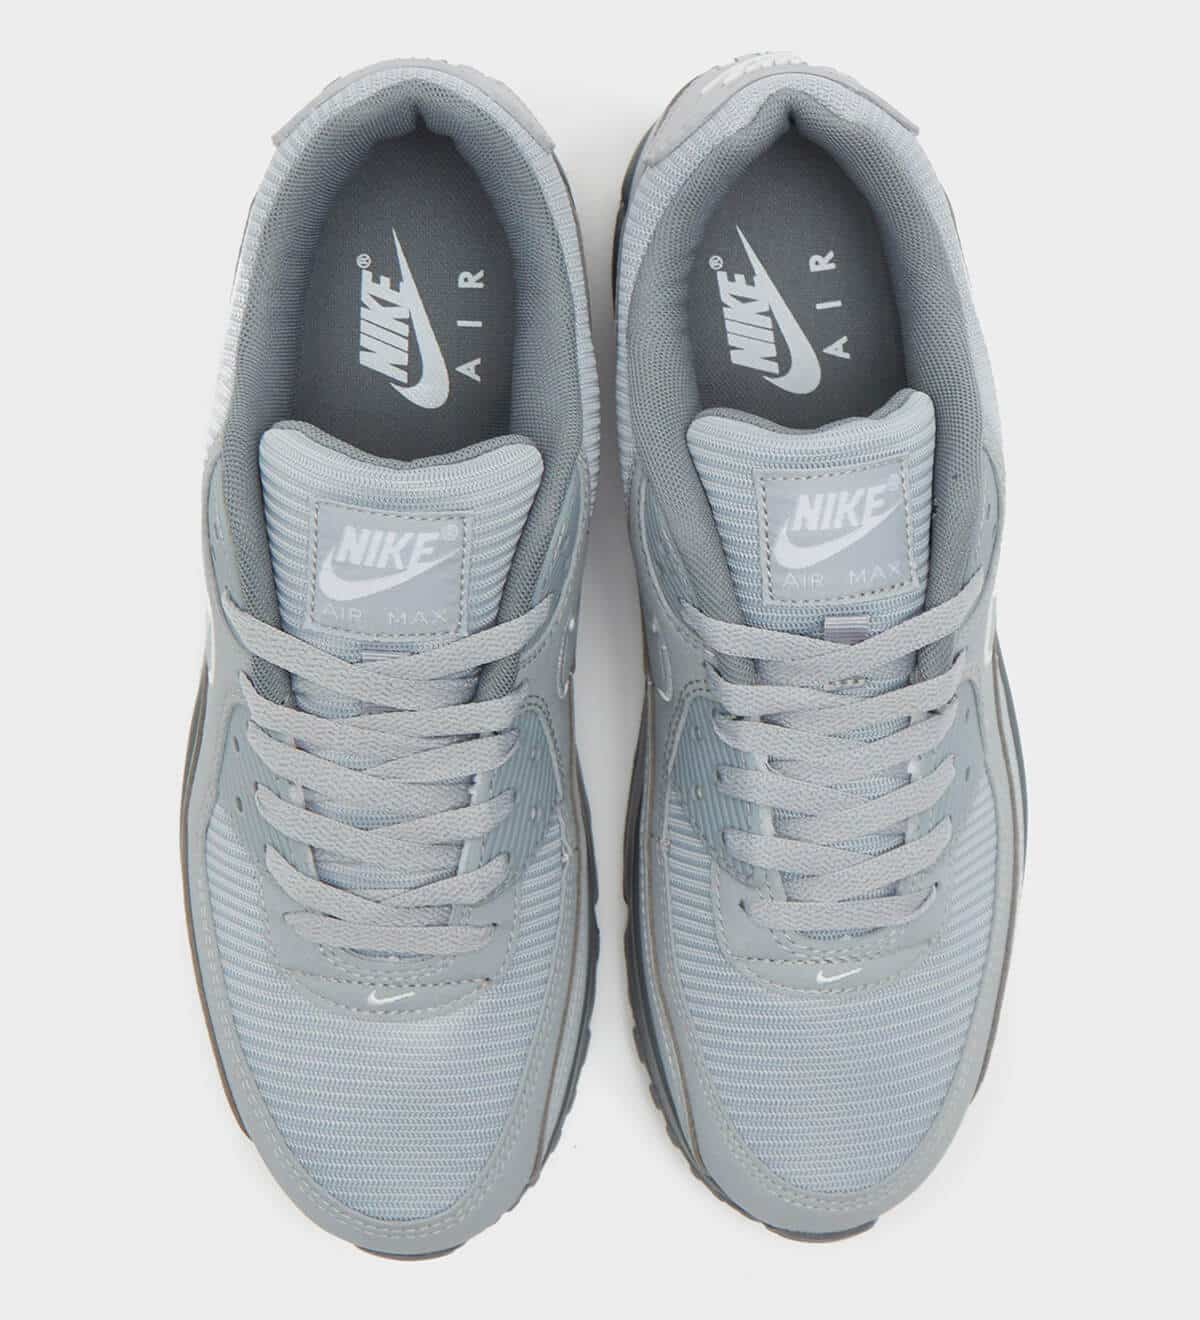 nike air max 90 wolf grey release date 3